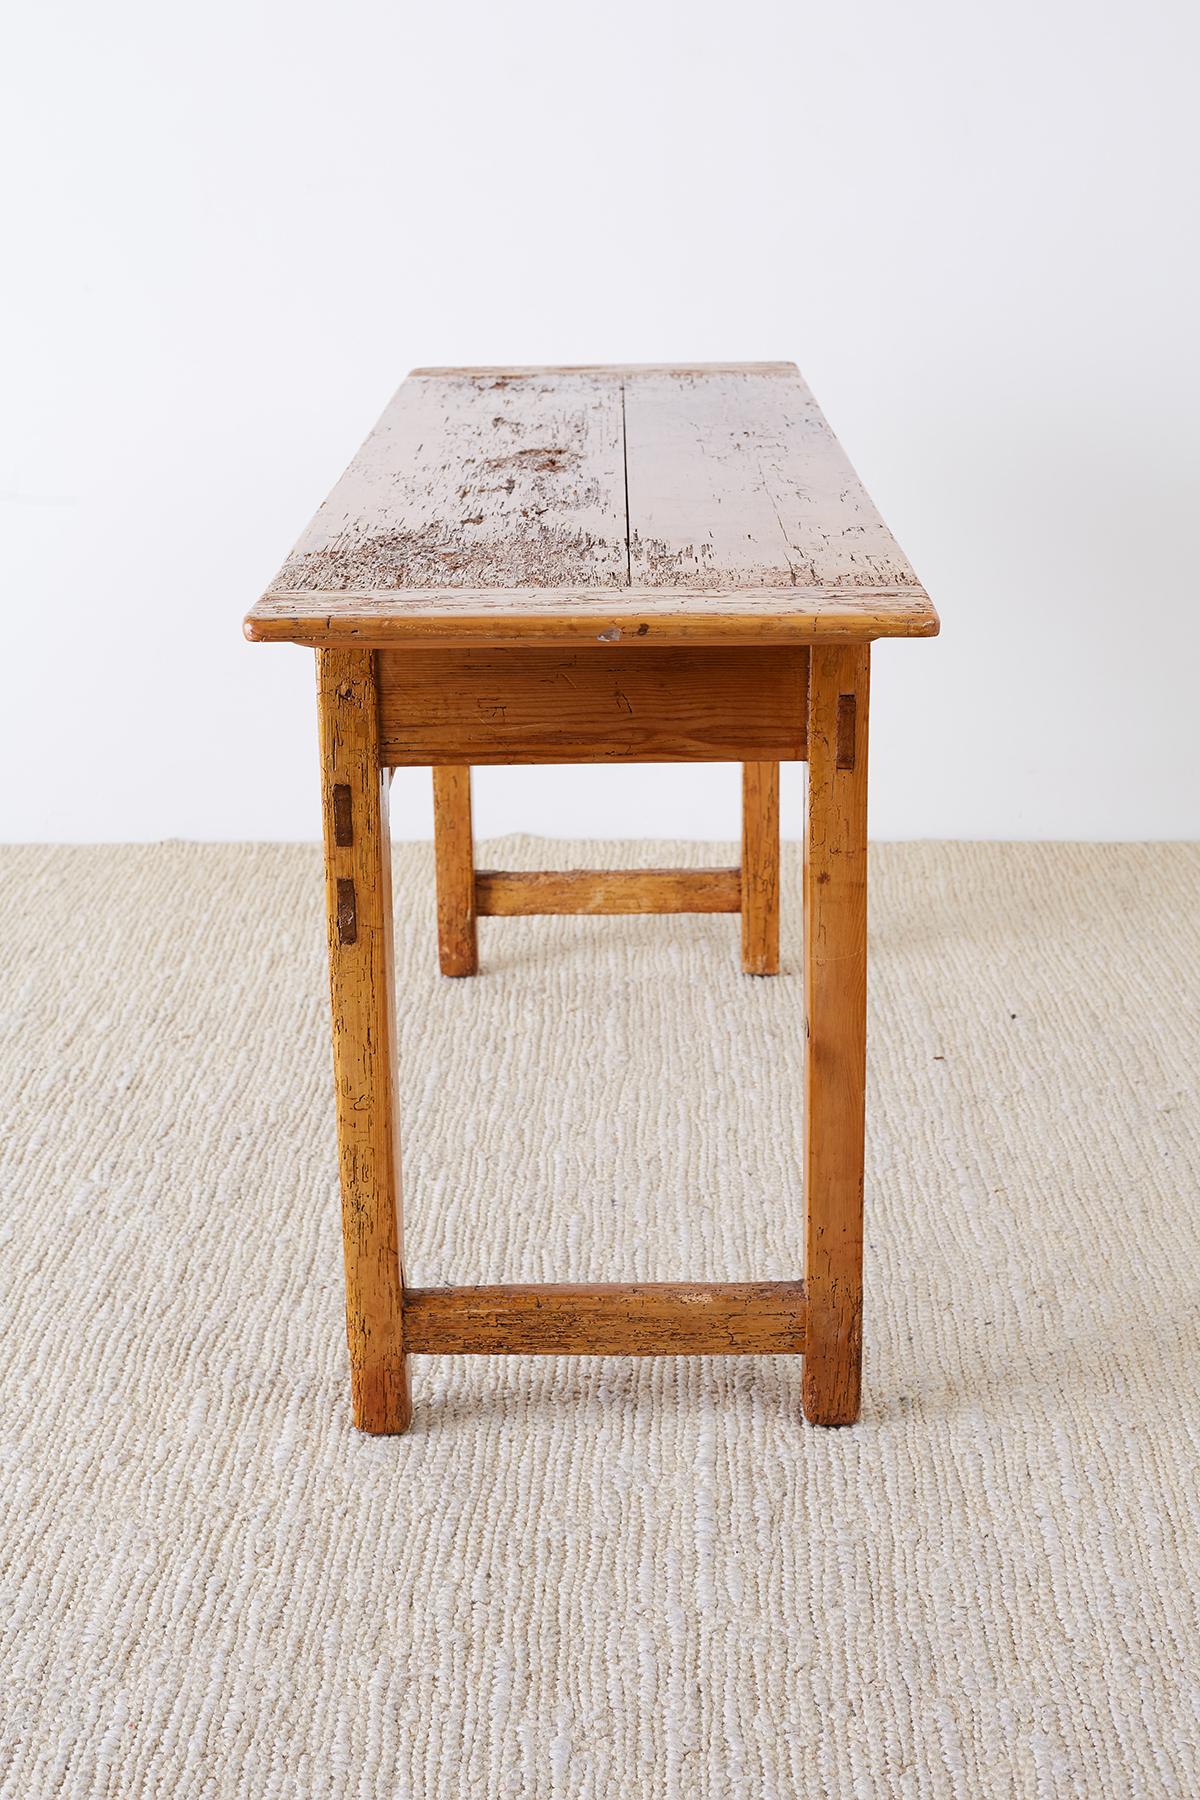 18th Century and Earlier 18th Century Rustic Pine Farmhouse Table or Console